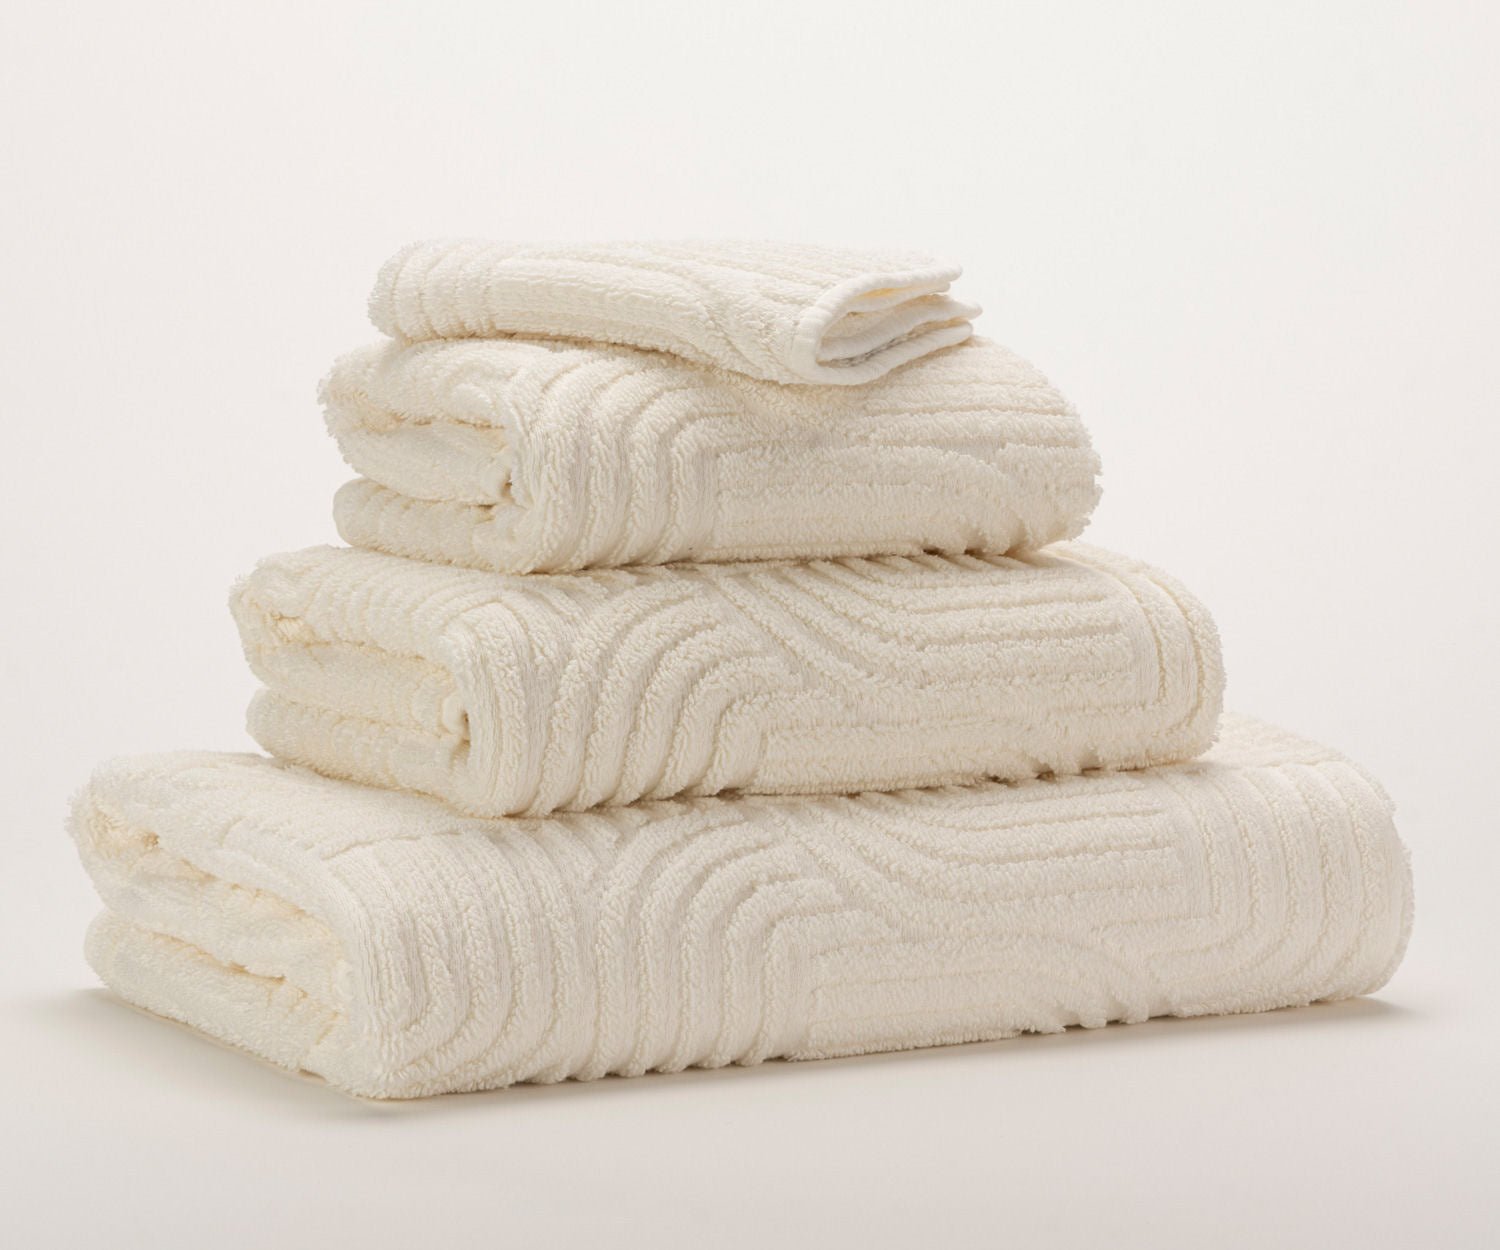 Abyss & Habidecor 100% Giza Egyptian Cotton Towels OLLY - |VESIMI Design| Luxury Bathrooms and Home Decor